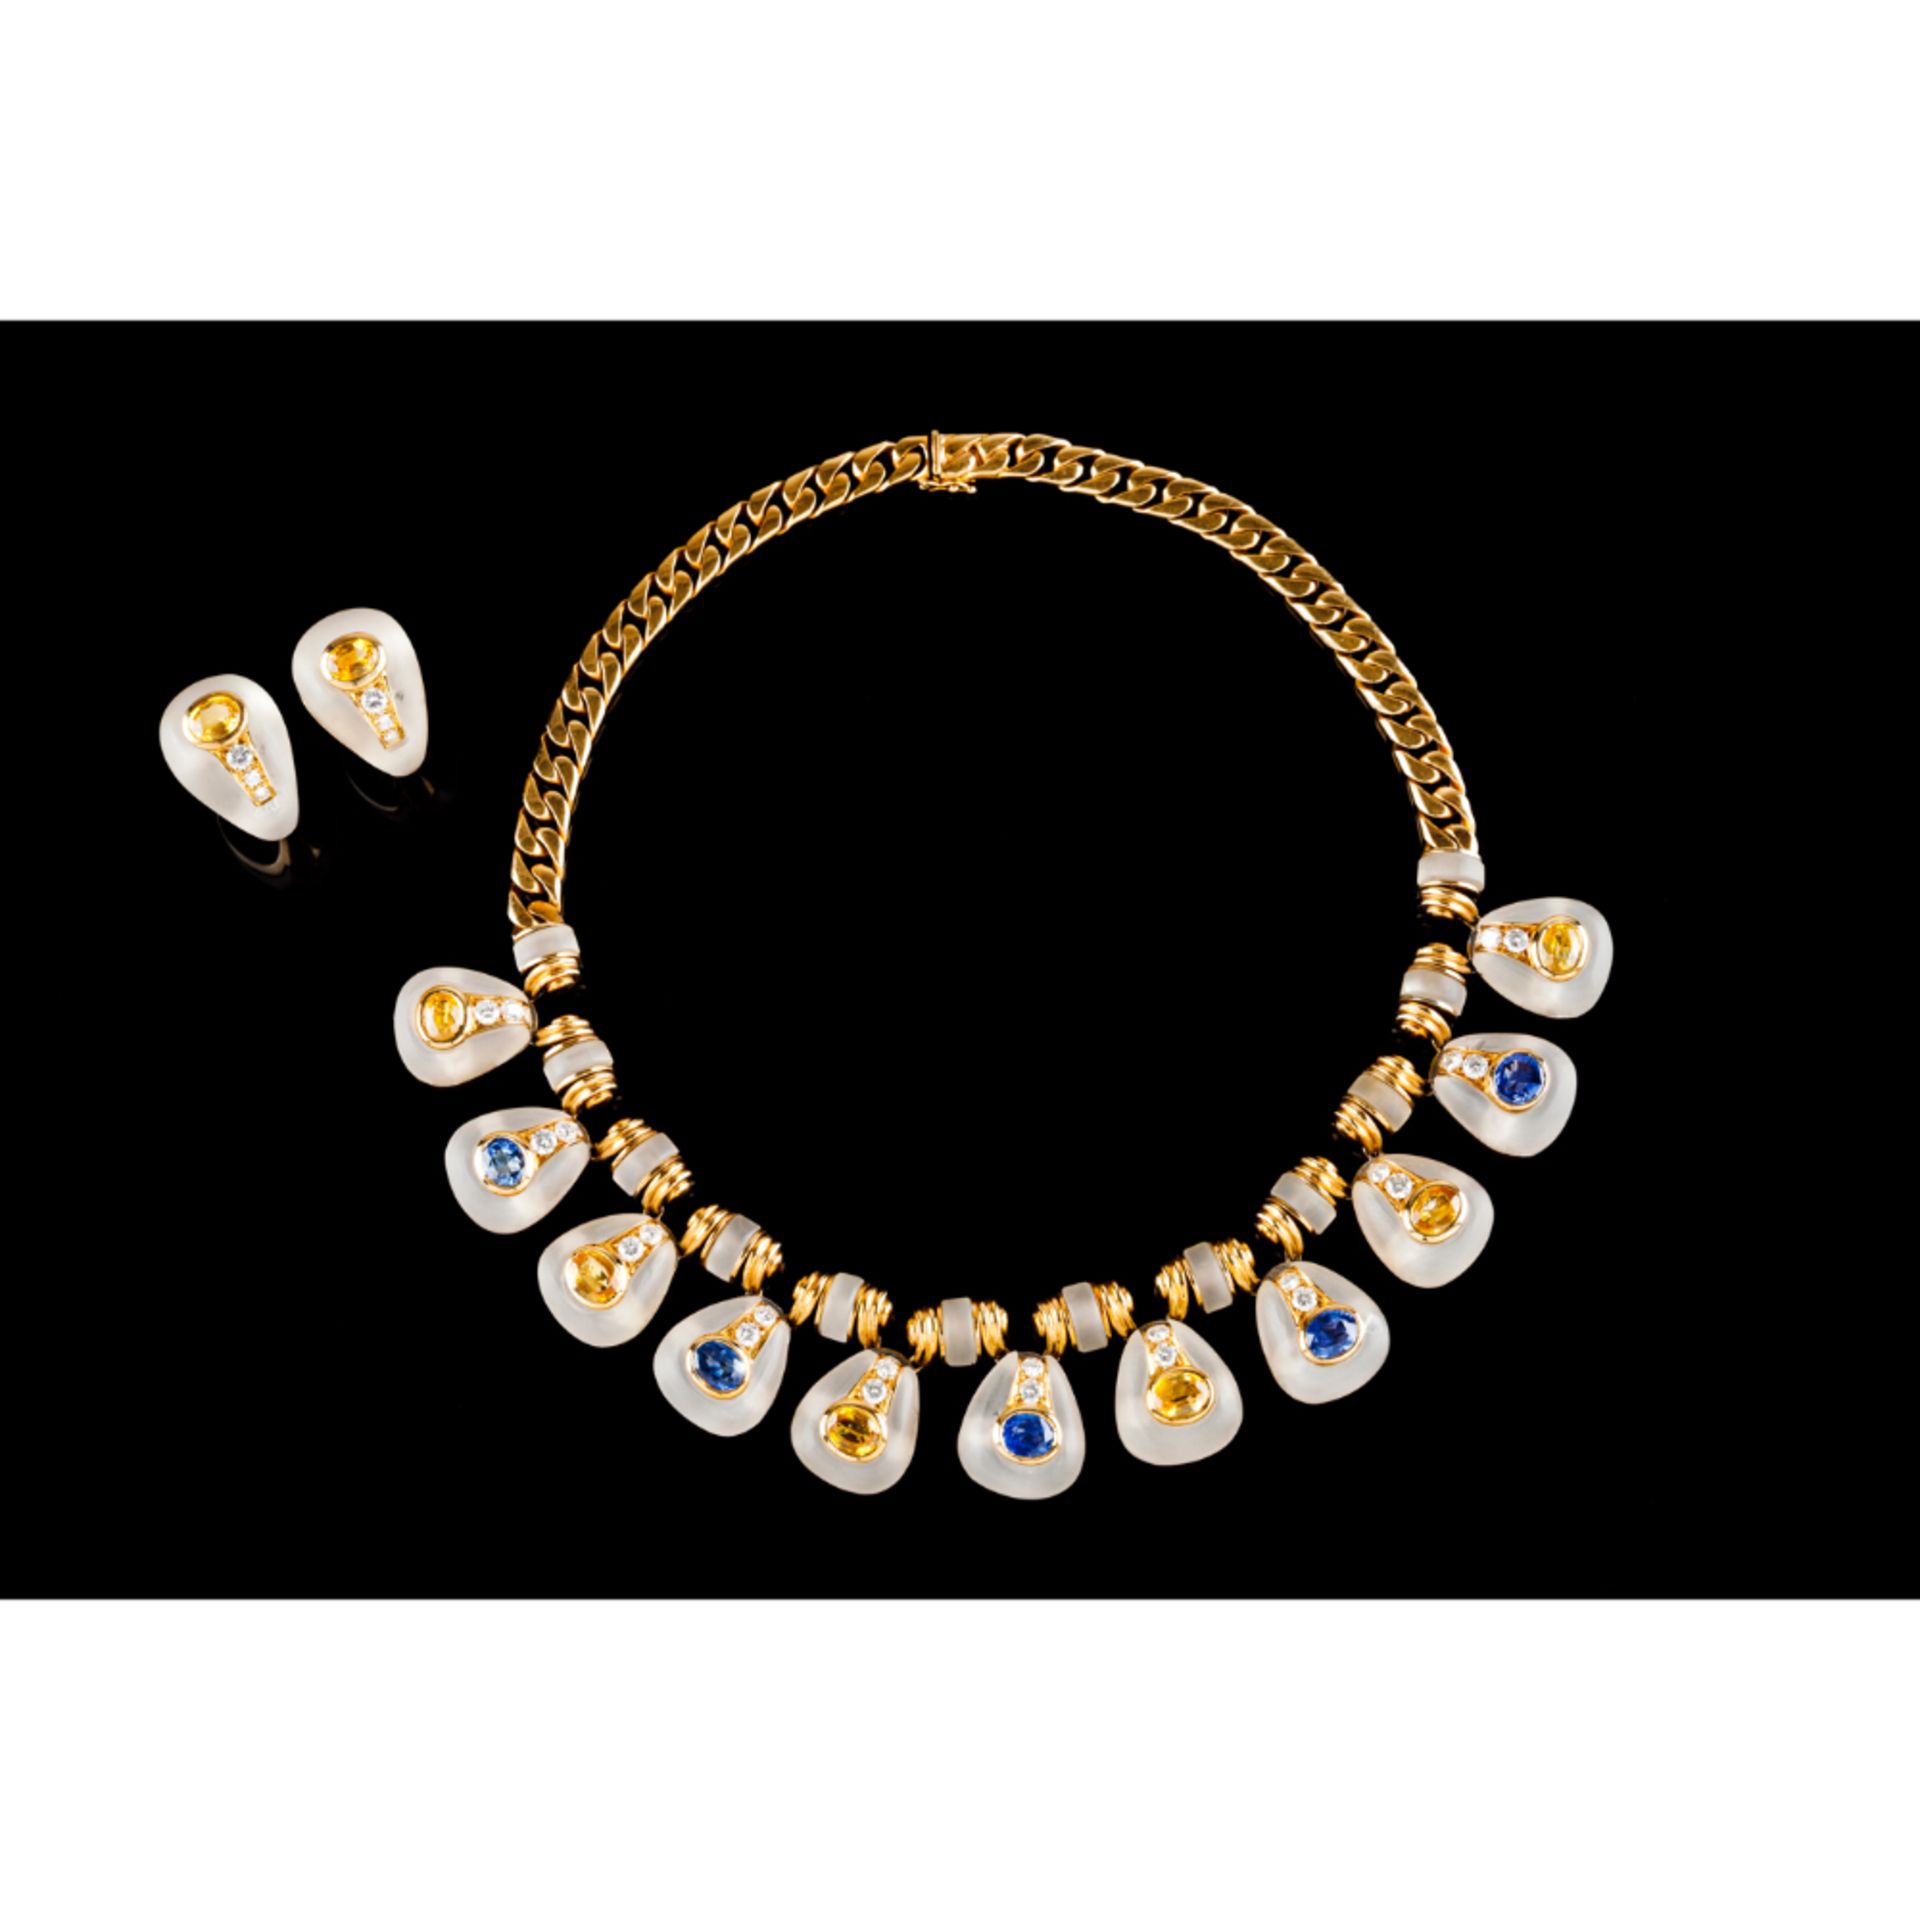 A necklace and pair of earringsGold Rock crystal elements set with 6 yellow sapphires, 5 blue